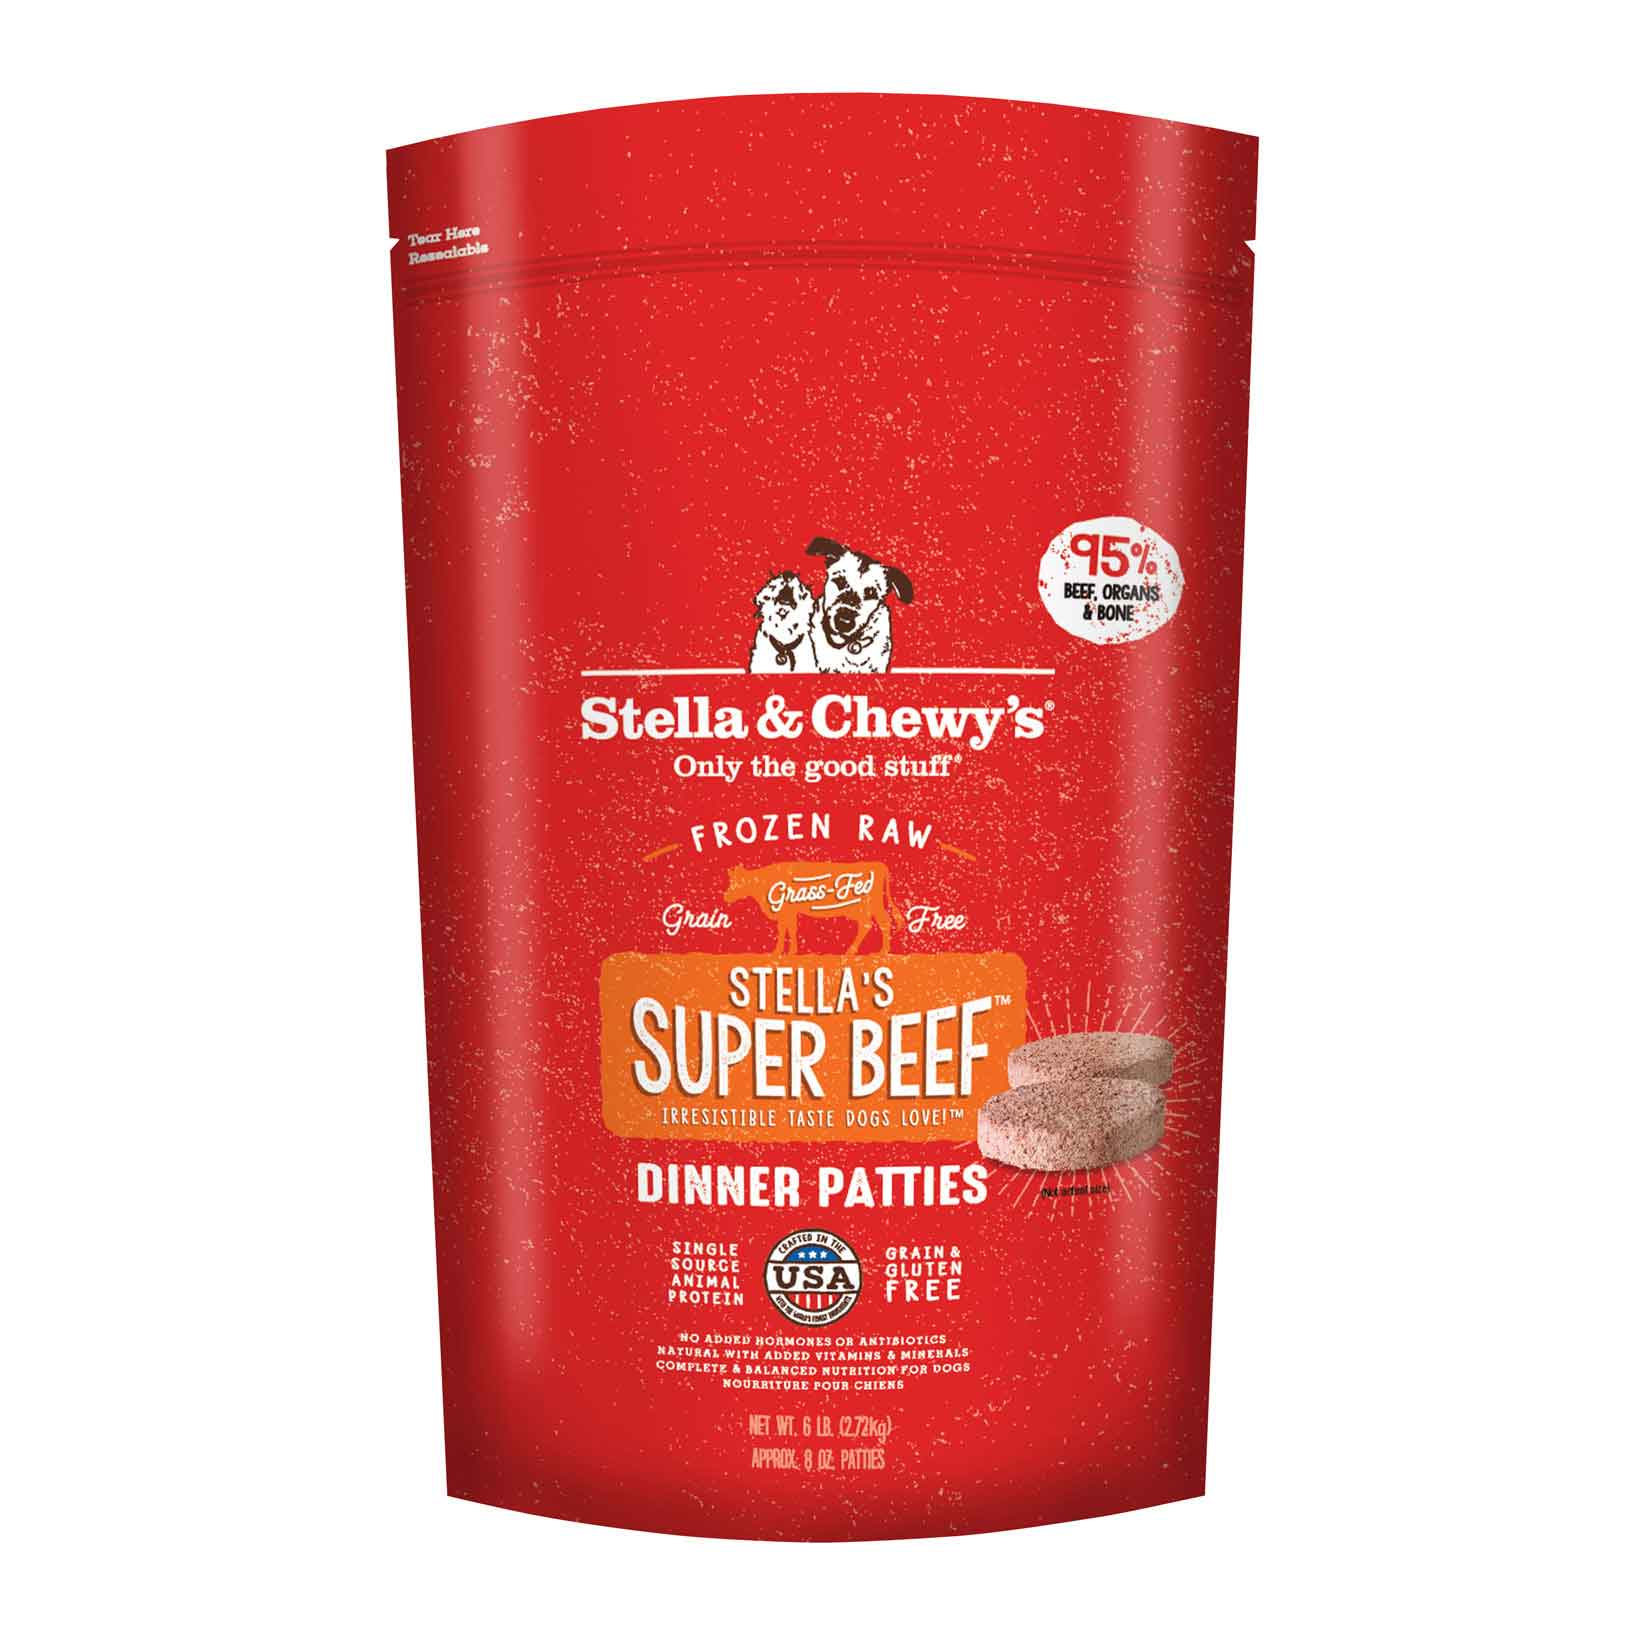 Stella & Chewy's Dog Frozen Raw, Stella's Super Beef Dinner Patties, 6 Pounds - Not Available for Delivery